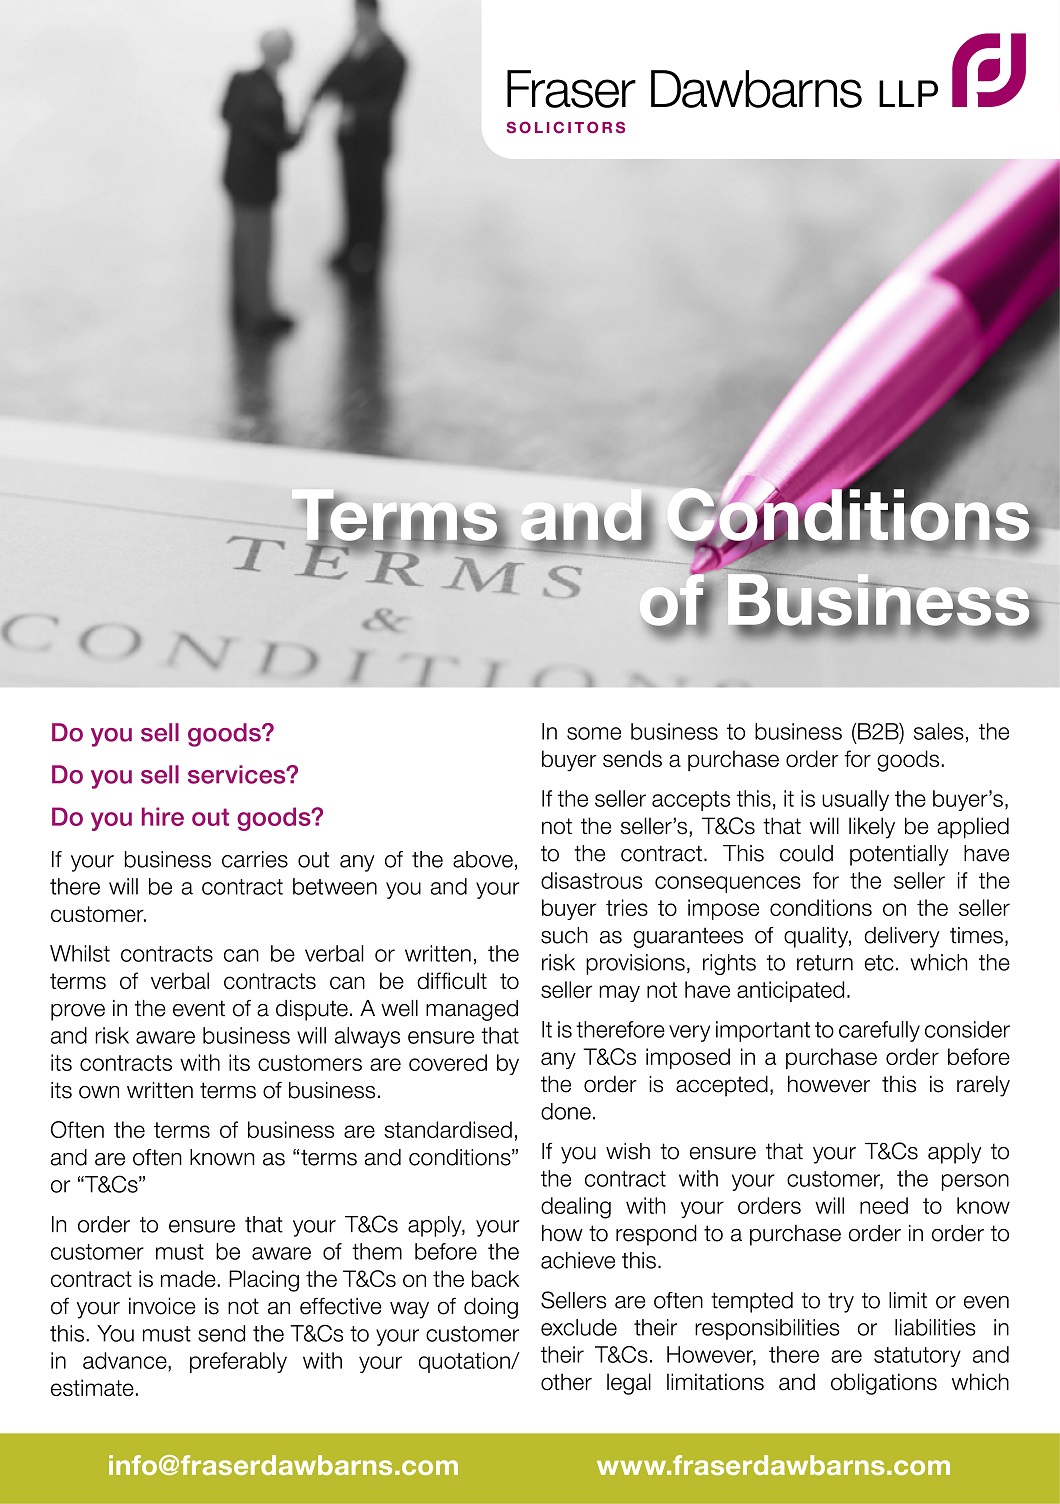 terms_conditions_business